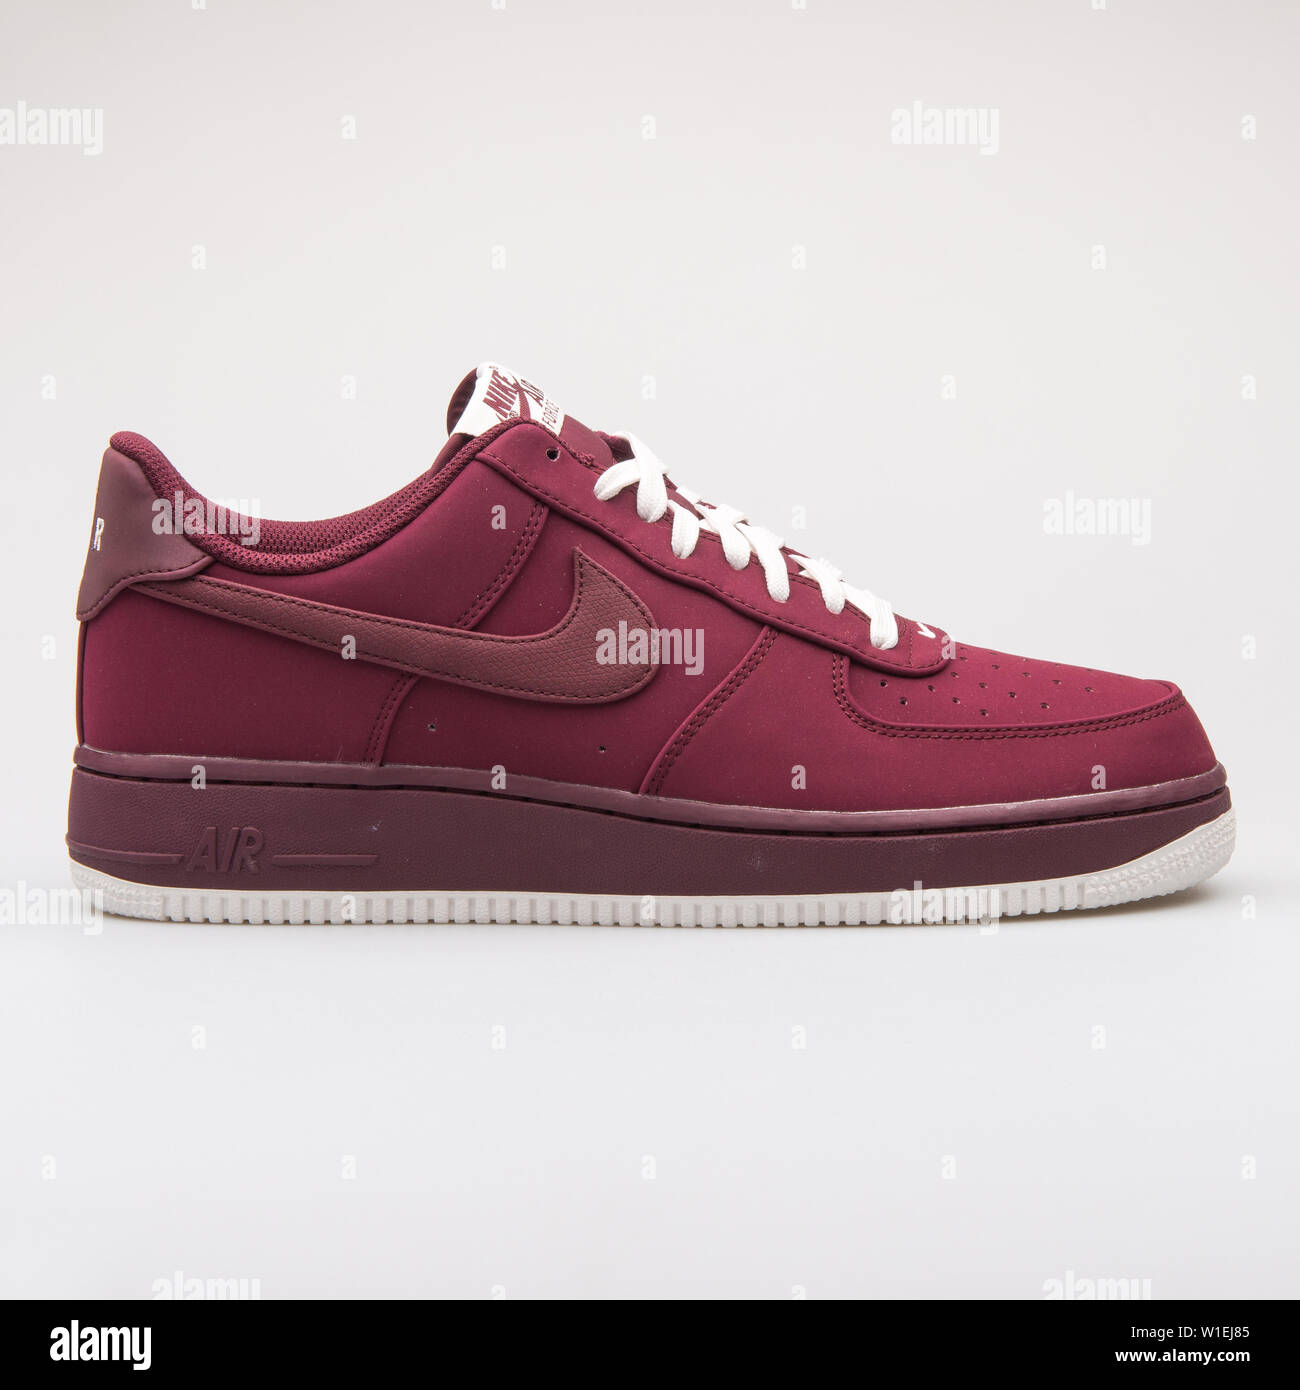 VIENNA, AUSTRIA - AUGUST 23, 2017: Nike Air Force 1 maroon sneaker on white  background Stock Photo - Alamy